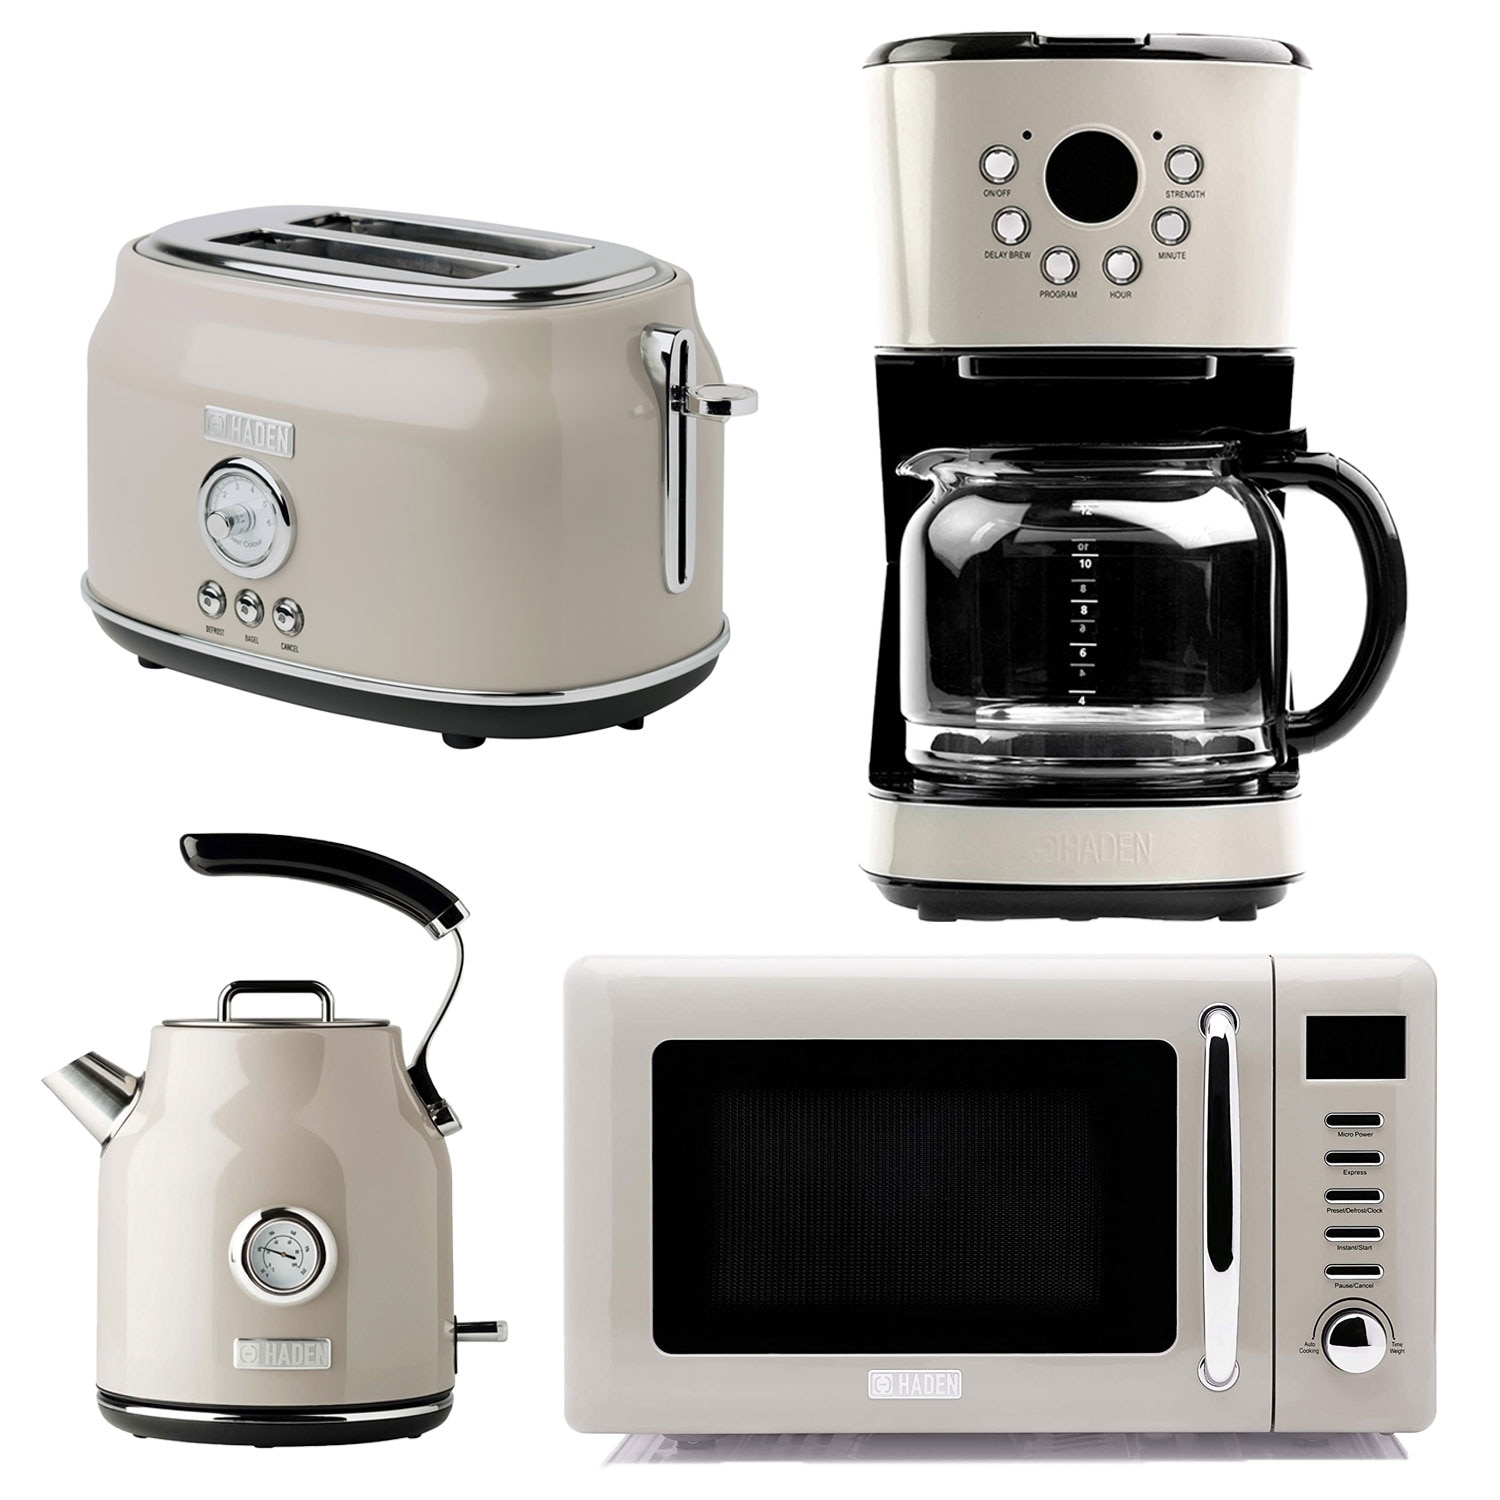 https://ak1.ostkcdn.com/images/products/is/images/direct/abf59c7c006d9de0e36a4586859137870813f7c8/Haden-Dorset-Toaster-%26-Kettle%2C-Coffee-Maker%2C-and-Cotswold-Microwave%2C-Putty-Beige.jpg